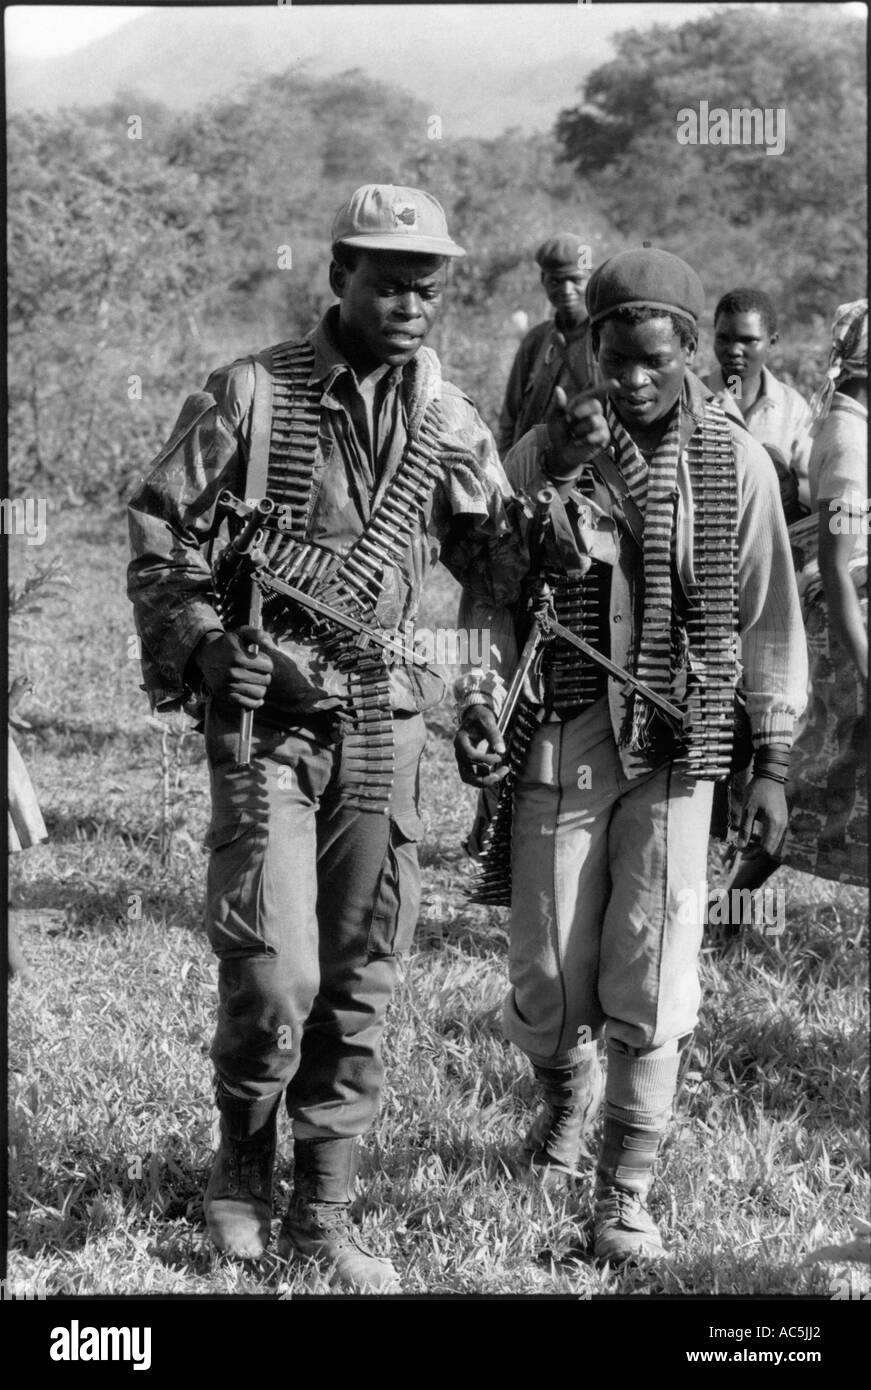 Fighters from Zanla Zimbabwe African National Liberation Army Stock